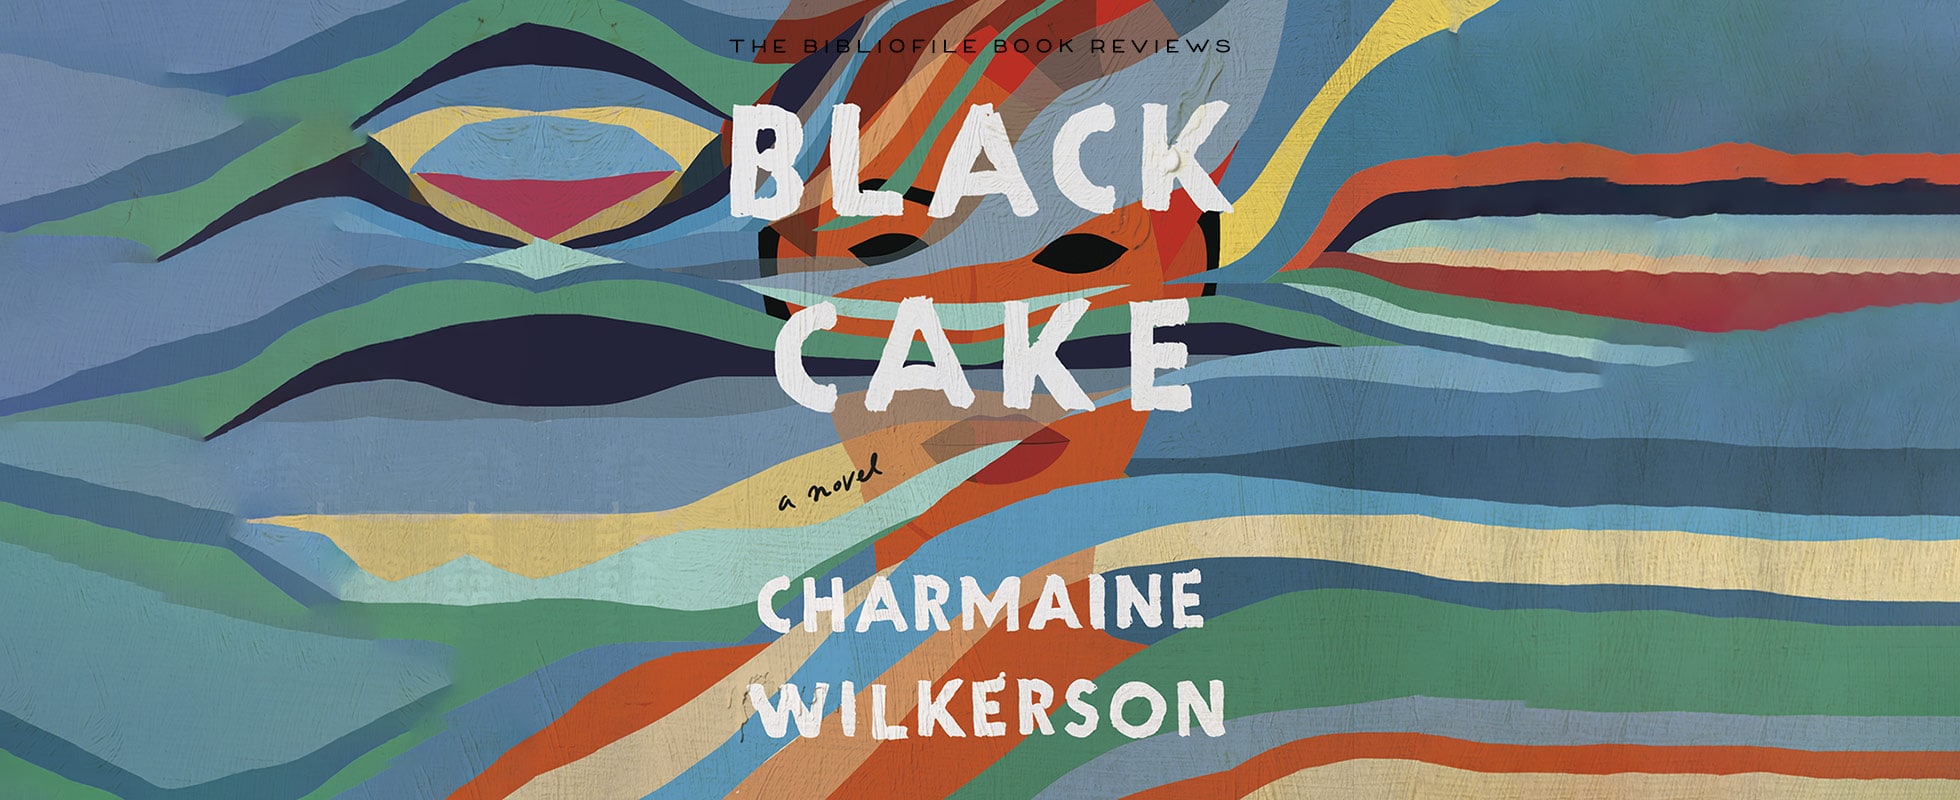 black cake by charmaine wilkerson book review plot summary synopsis spoilers discussion